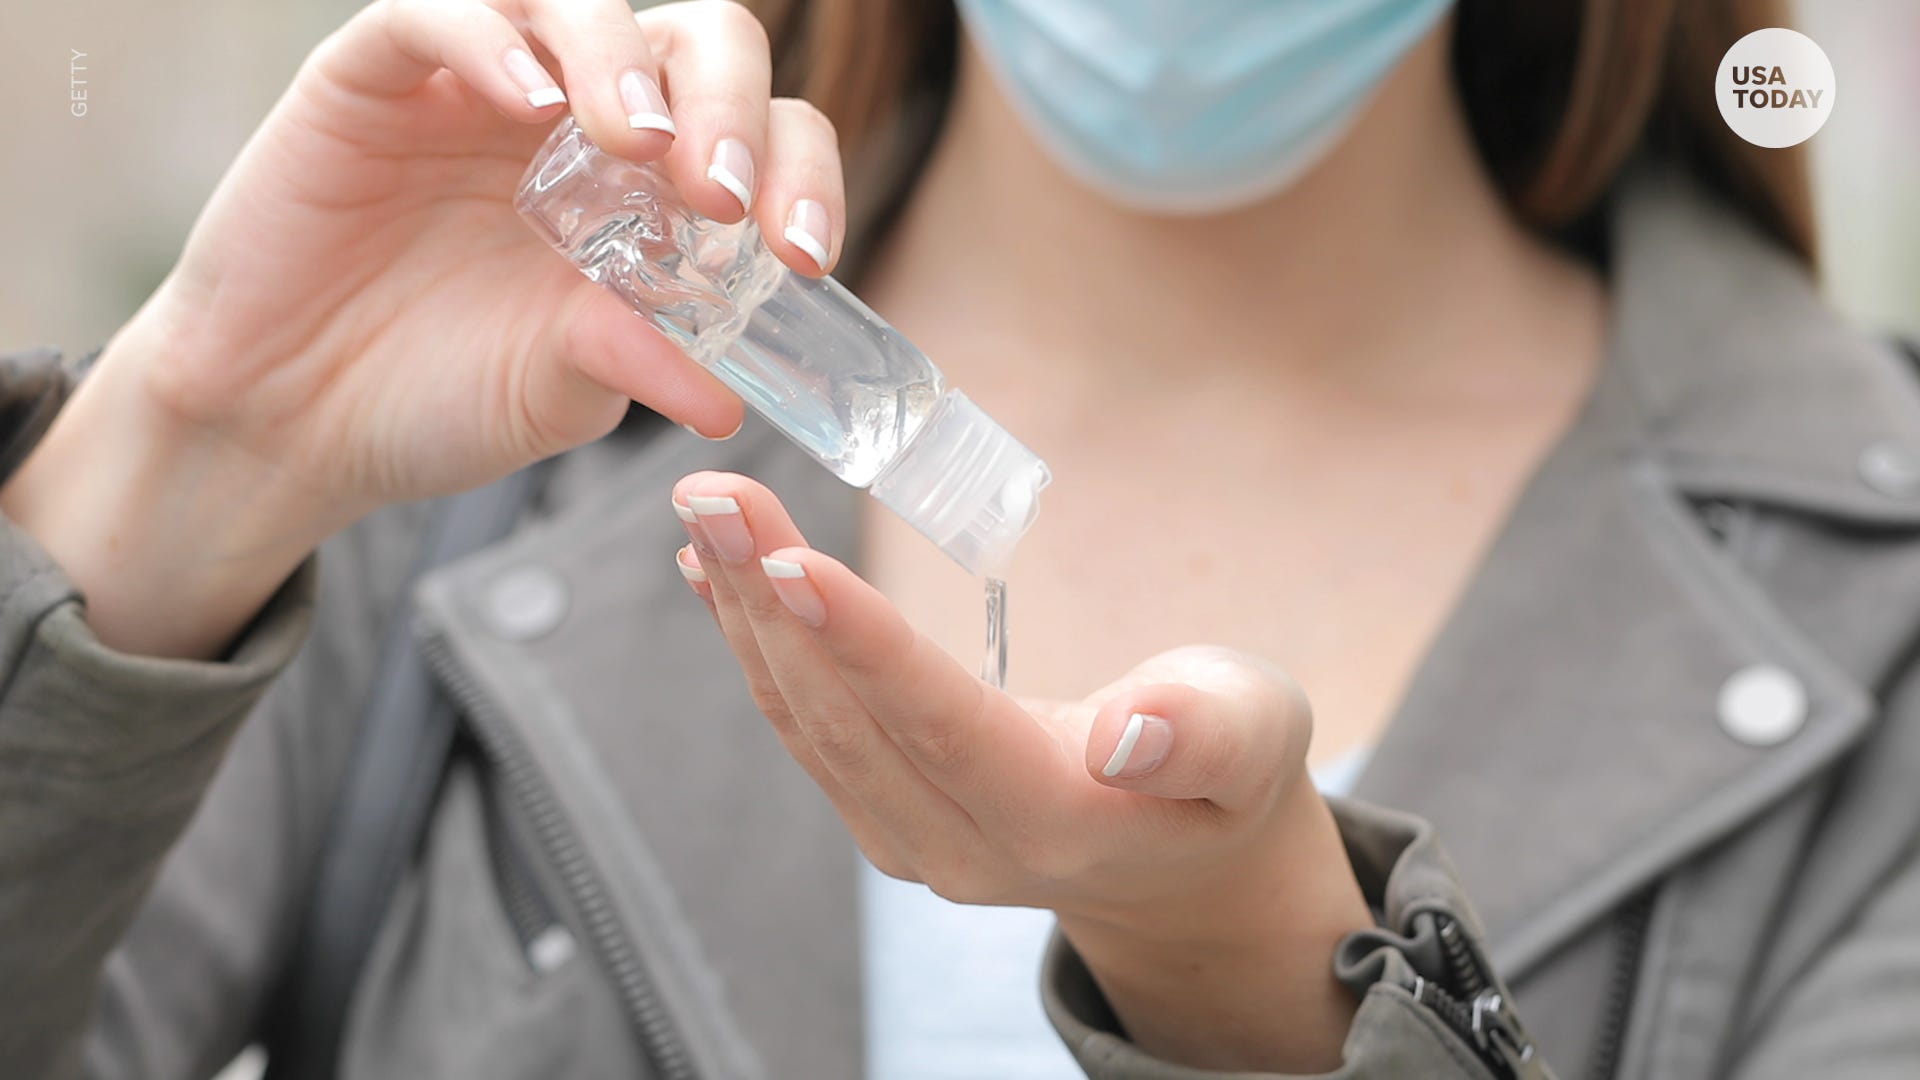 FDA issues alert of sanitizers with methanol